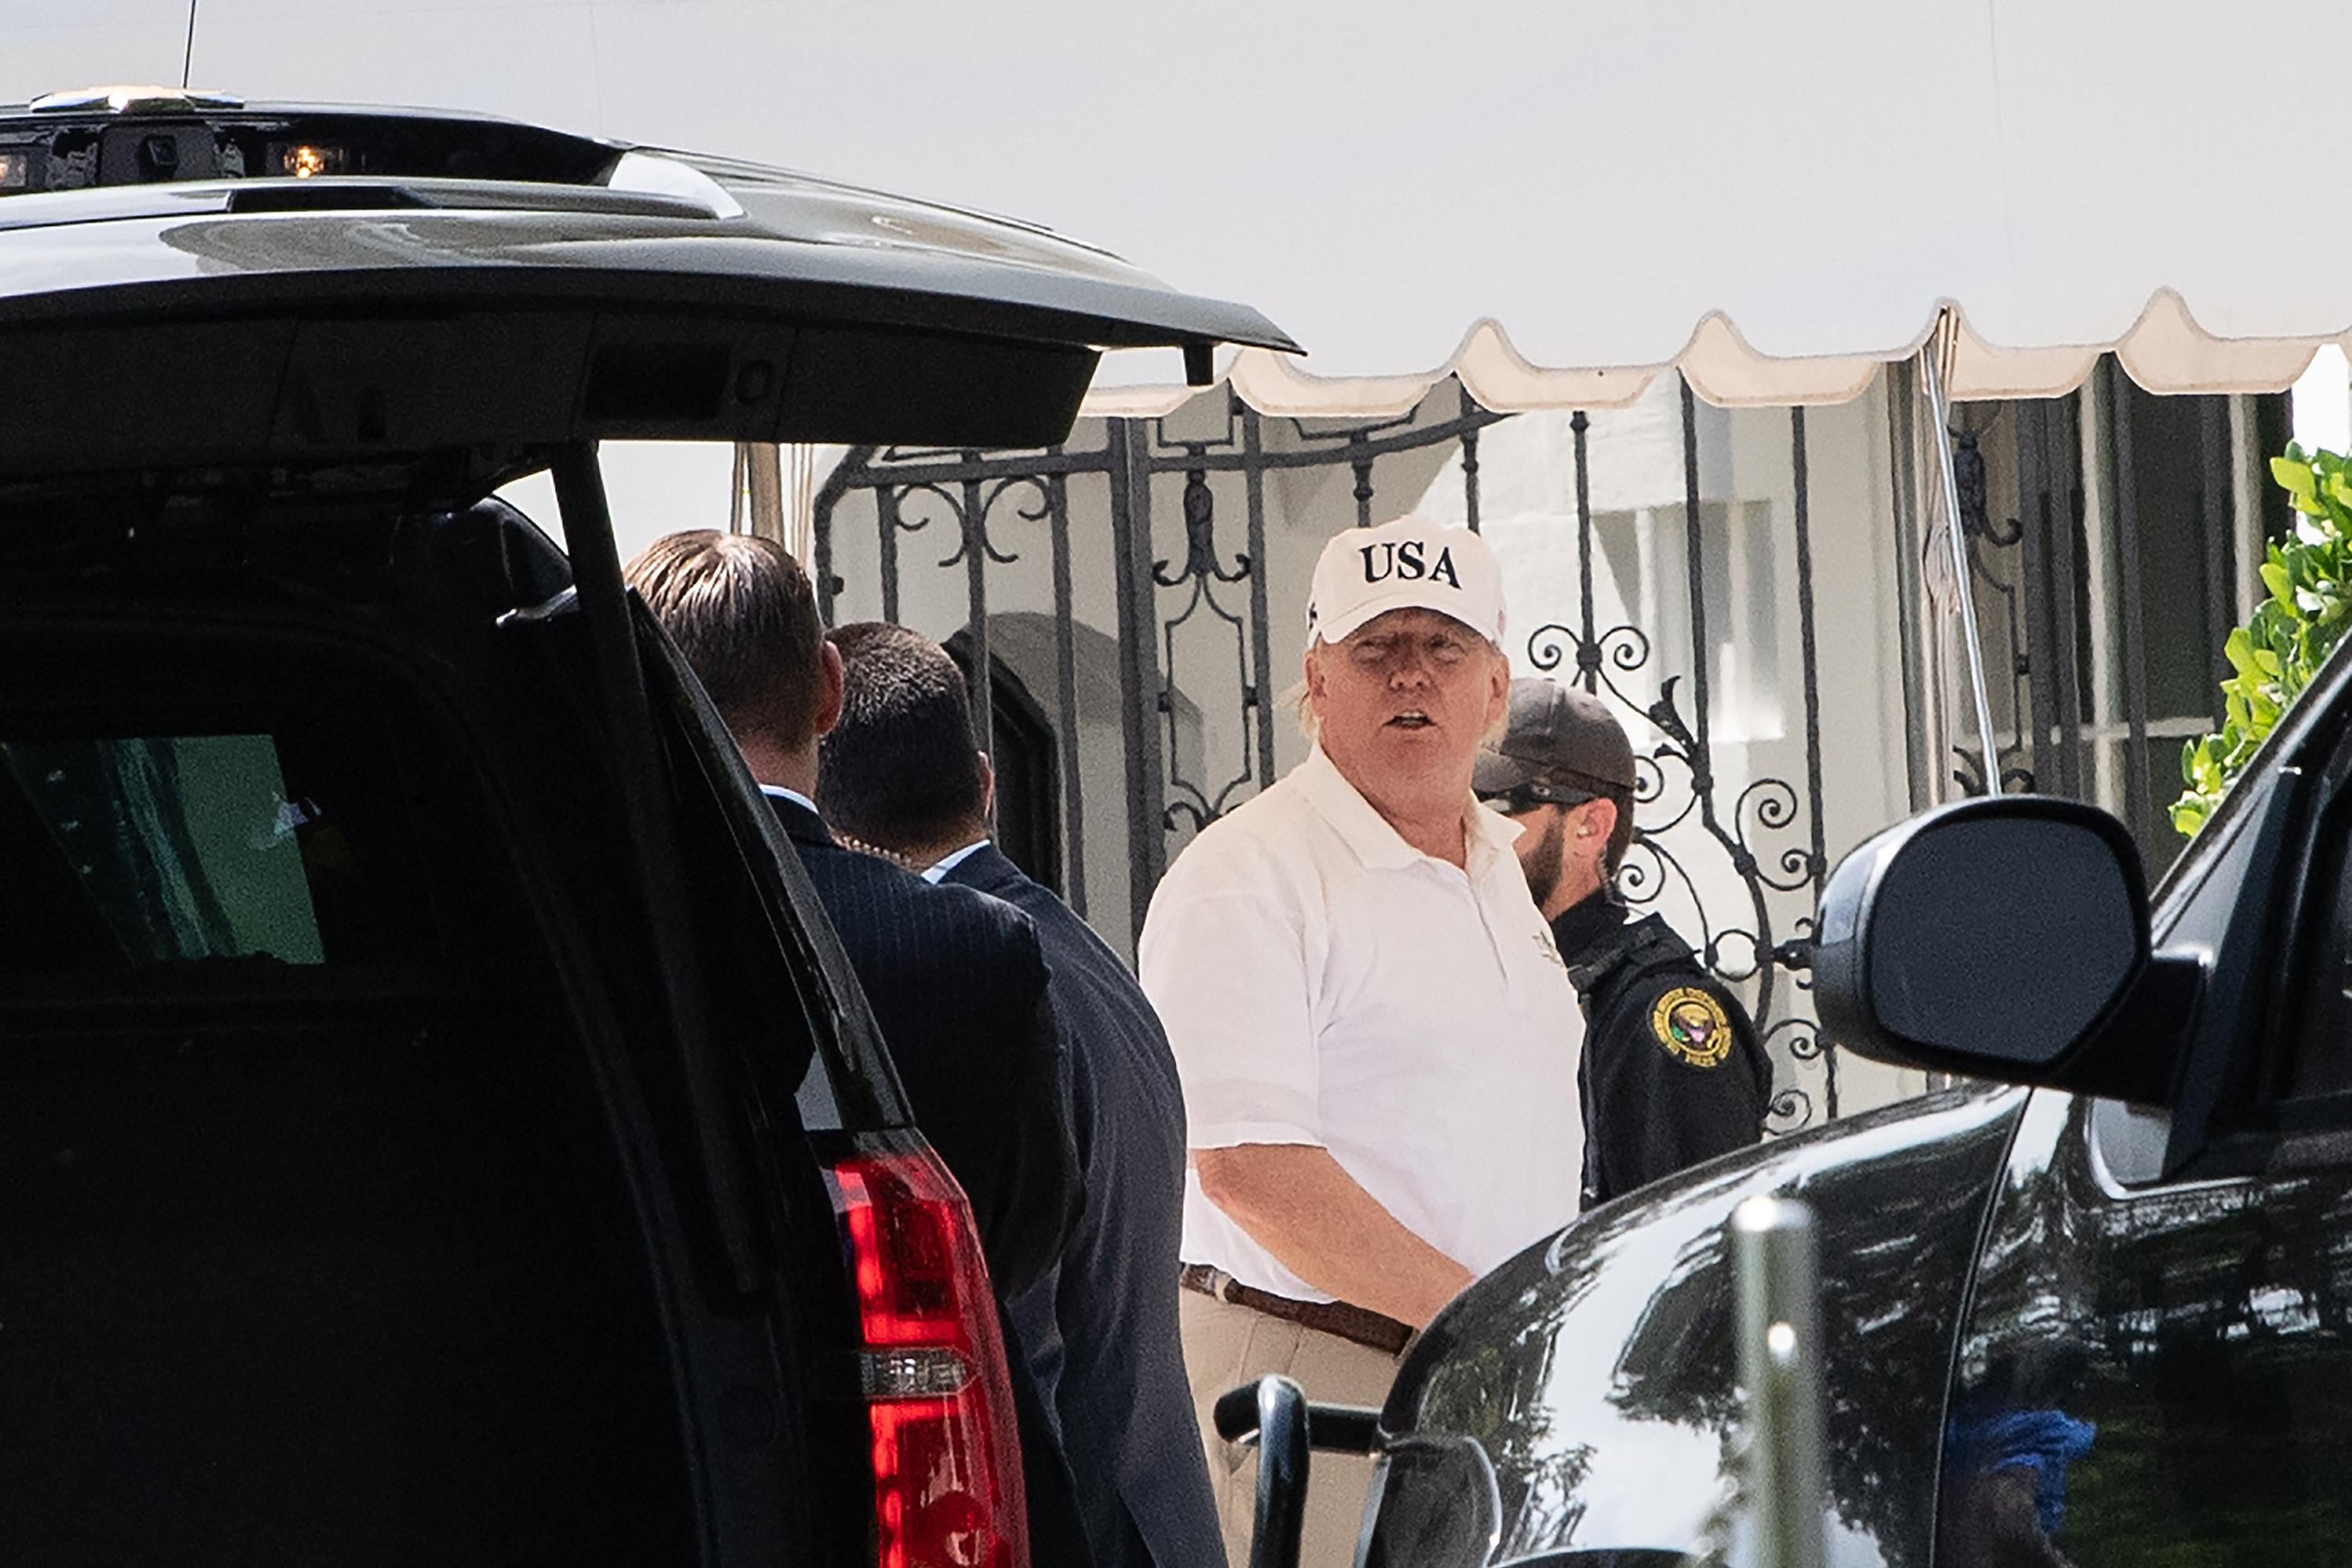 President Donald Trump arrives at the White House in Washington, DC, on June 16, 2019 after golfing at his Trump National Golf Club in Virginia. 